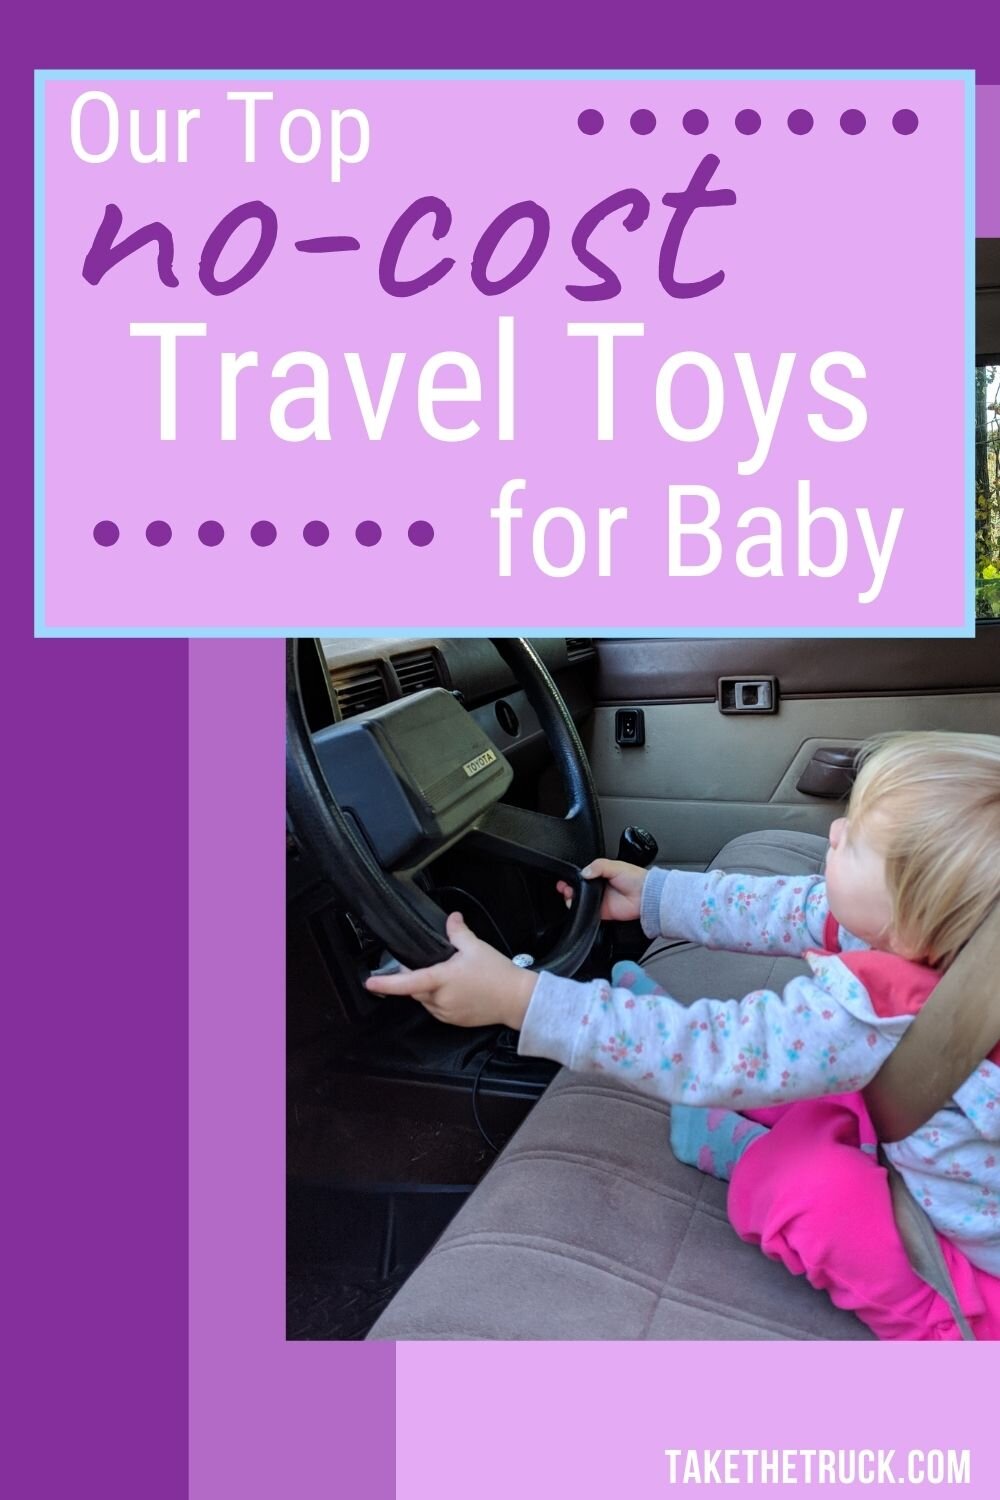 If you’re taking a budget road trip with your baby, read this post for inexpensive travel toys just right for baby or one year old. Don’t spend your money on baby road trip travel toys!